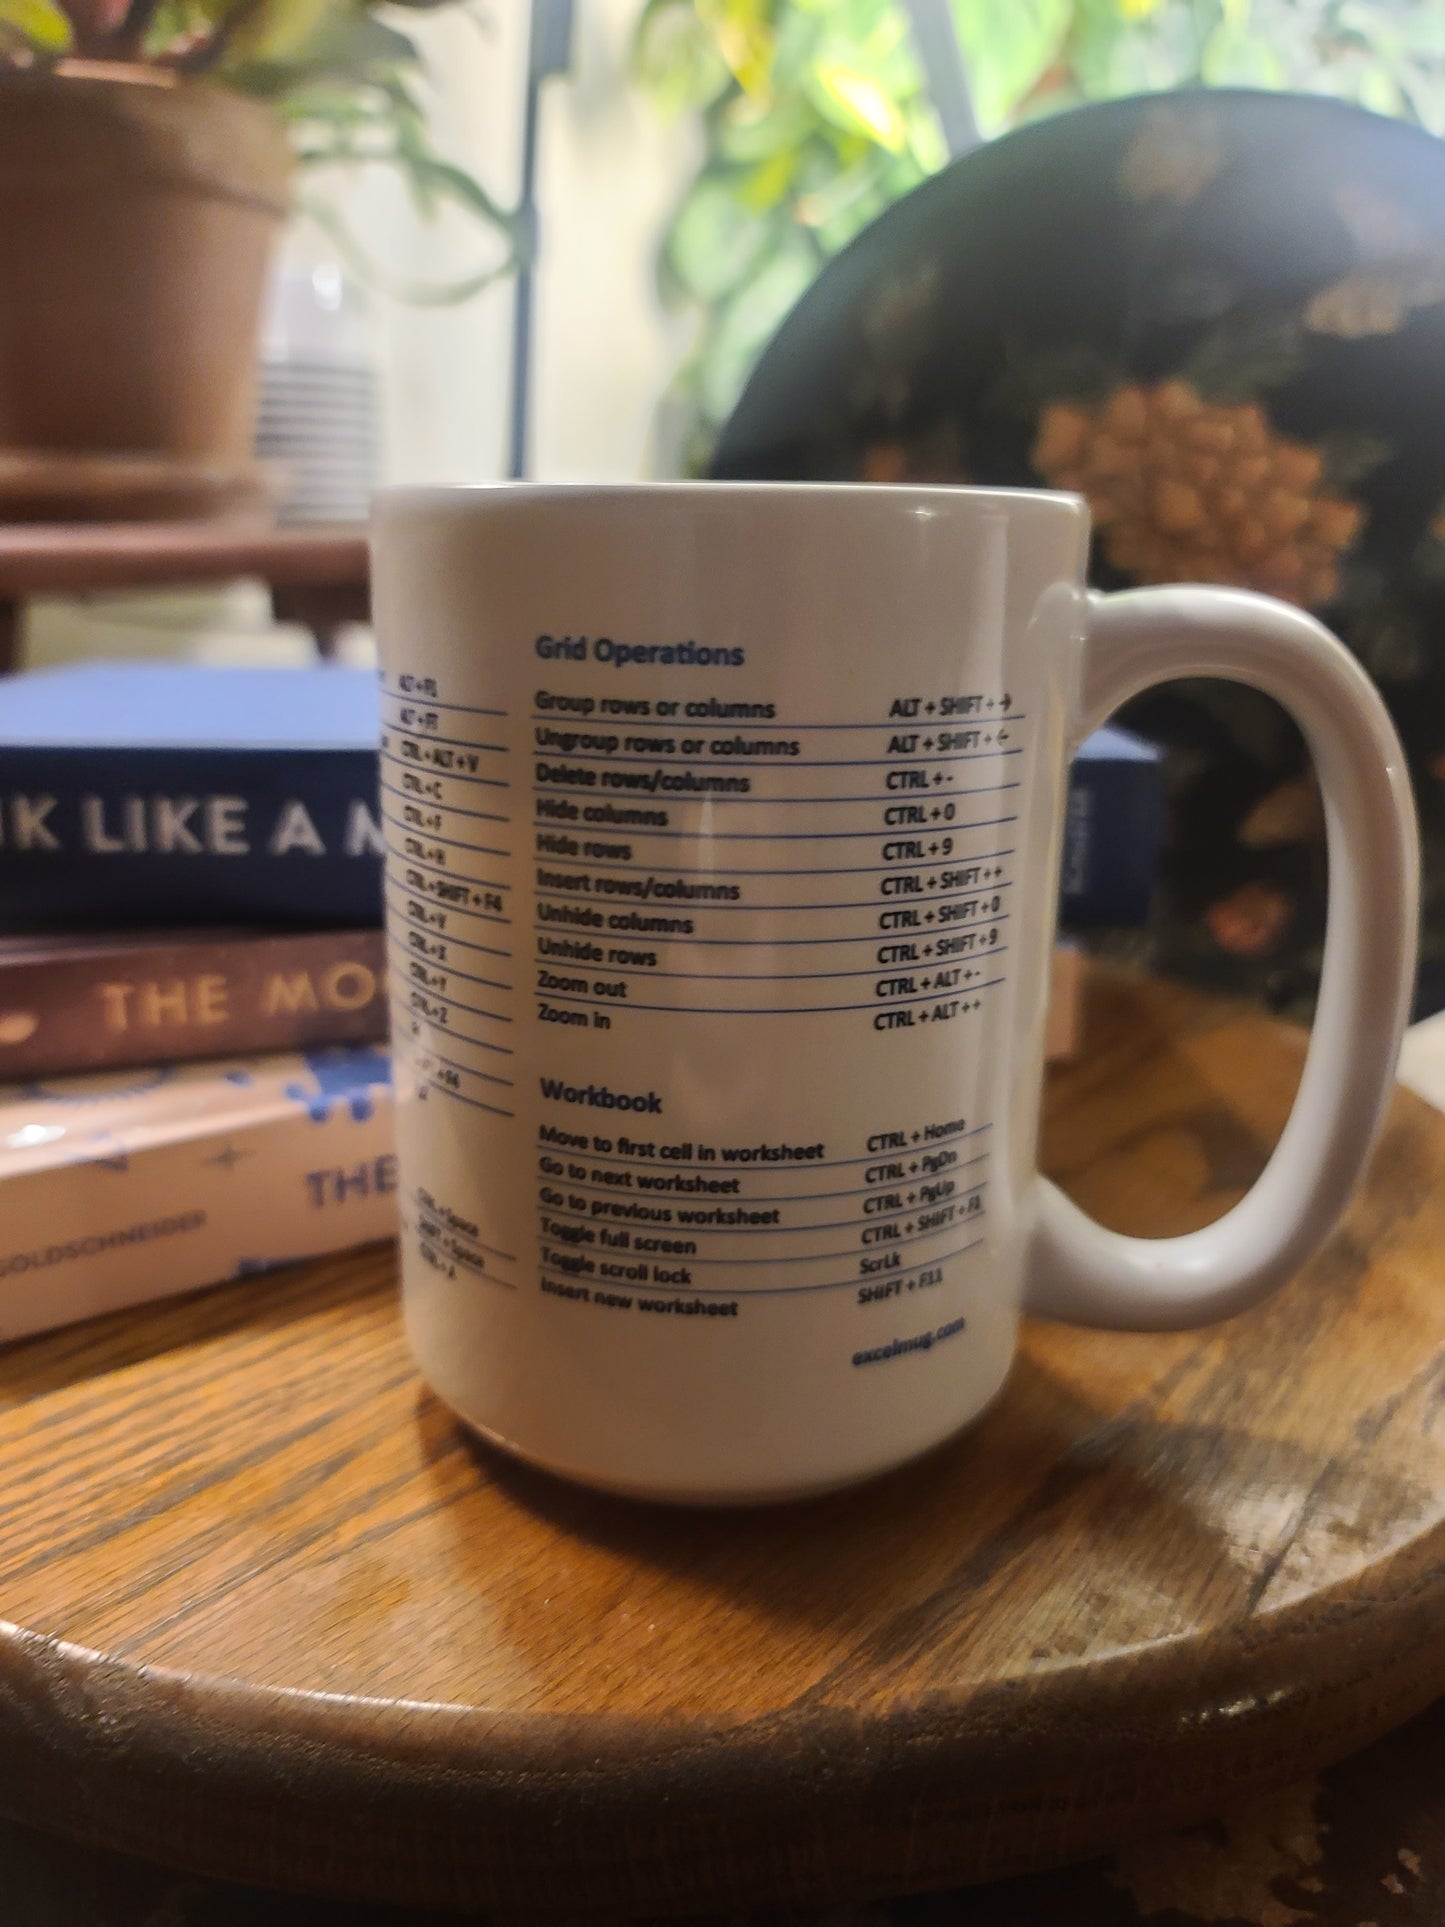 The Excel Super Shortcuts Mug (for PC)